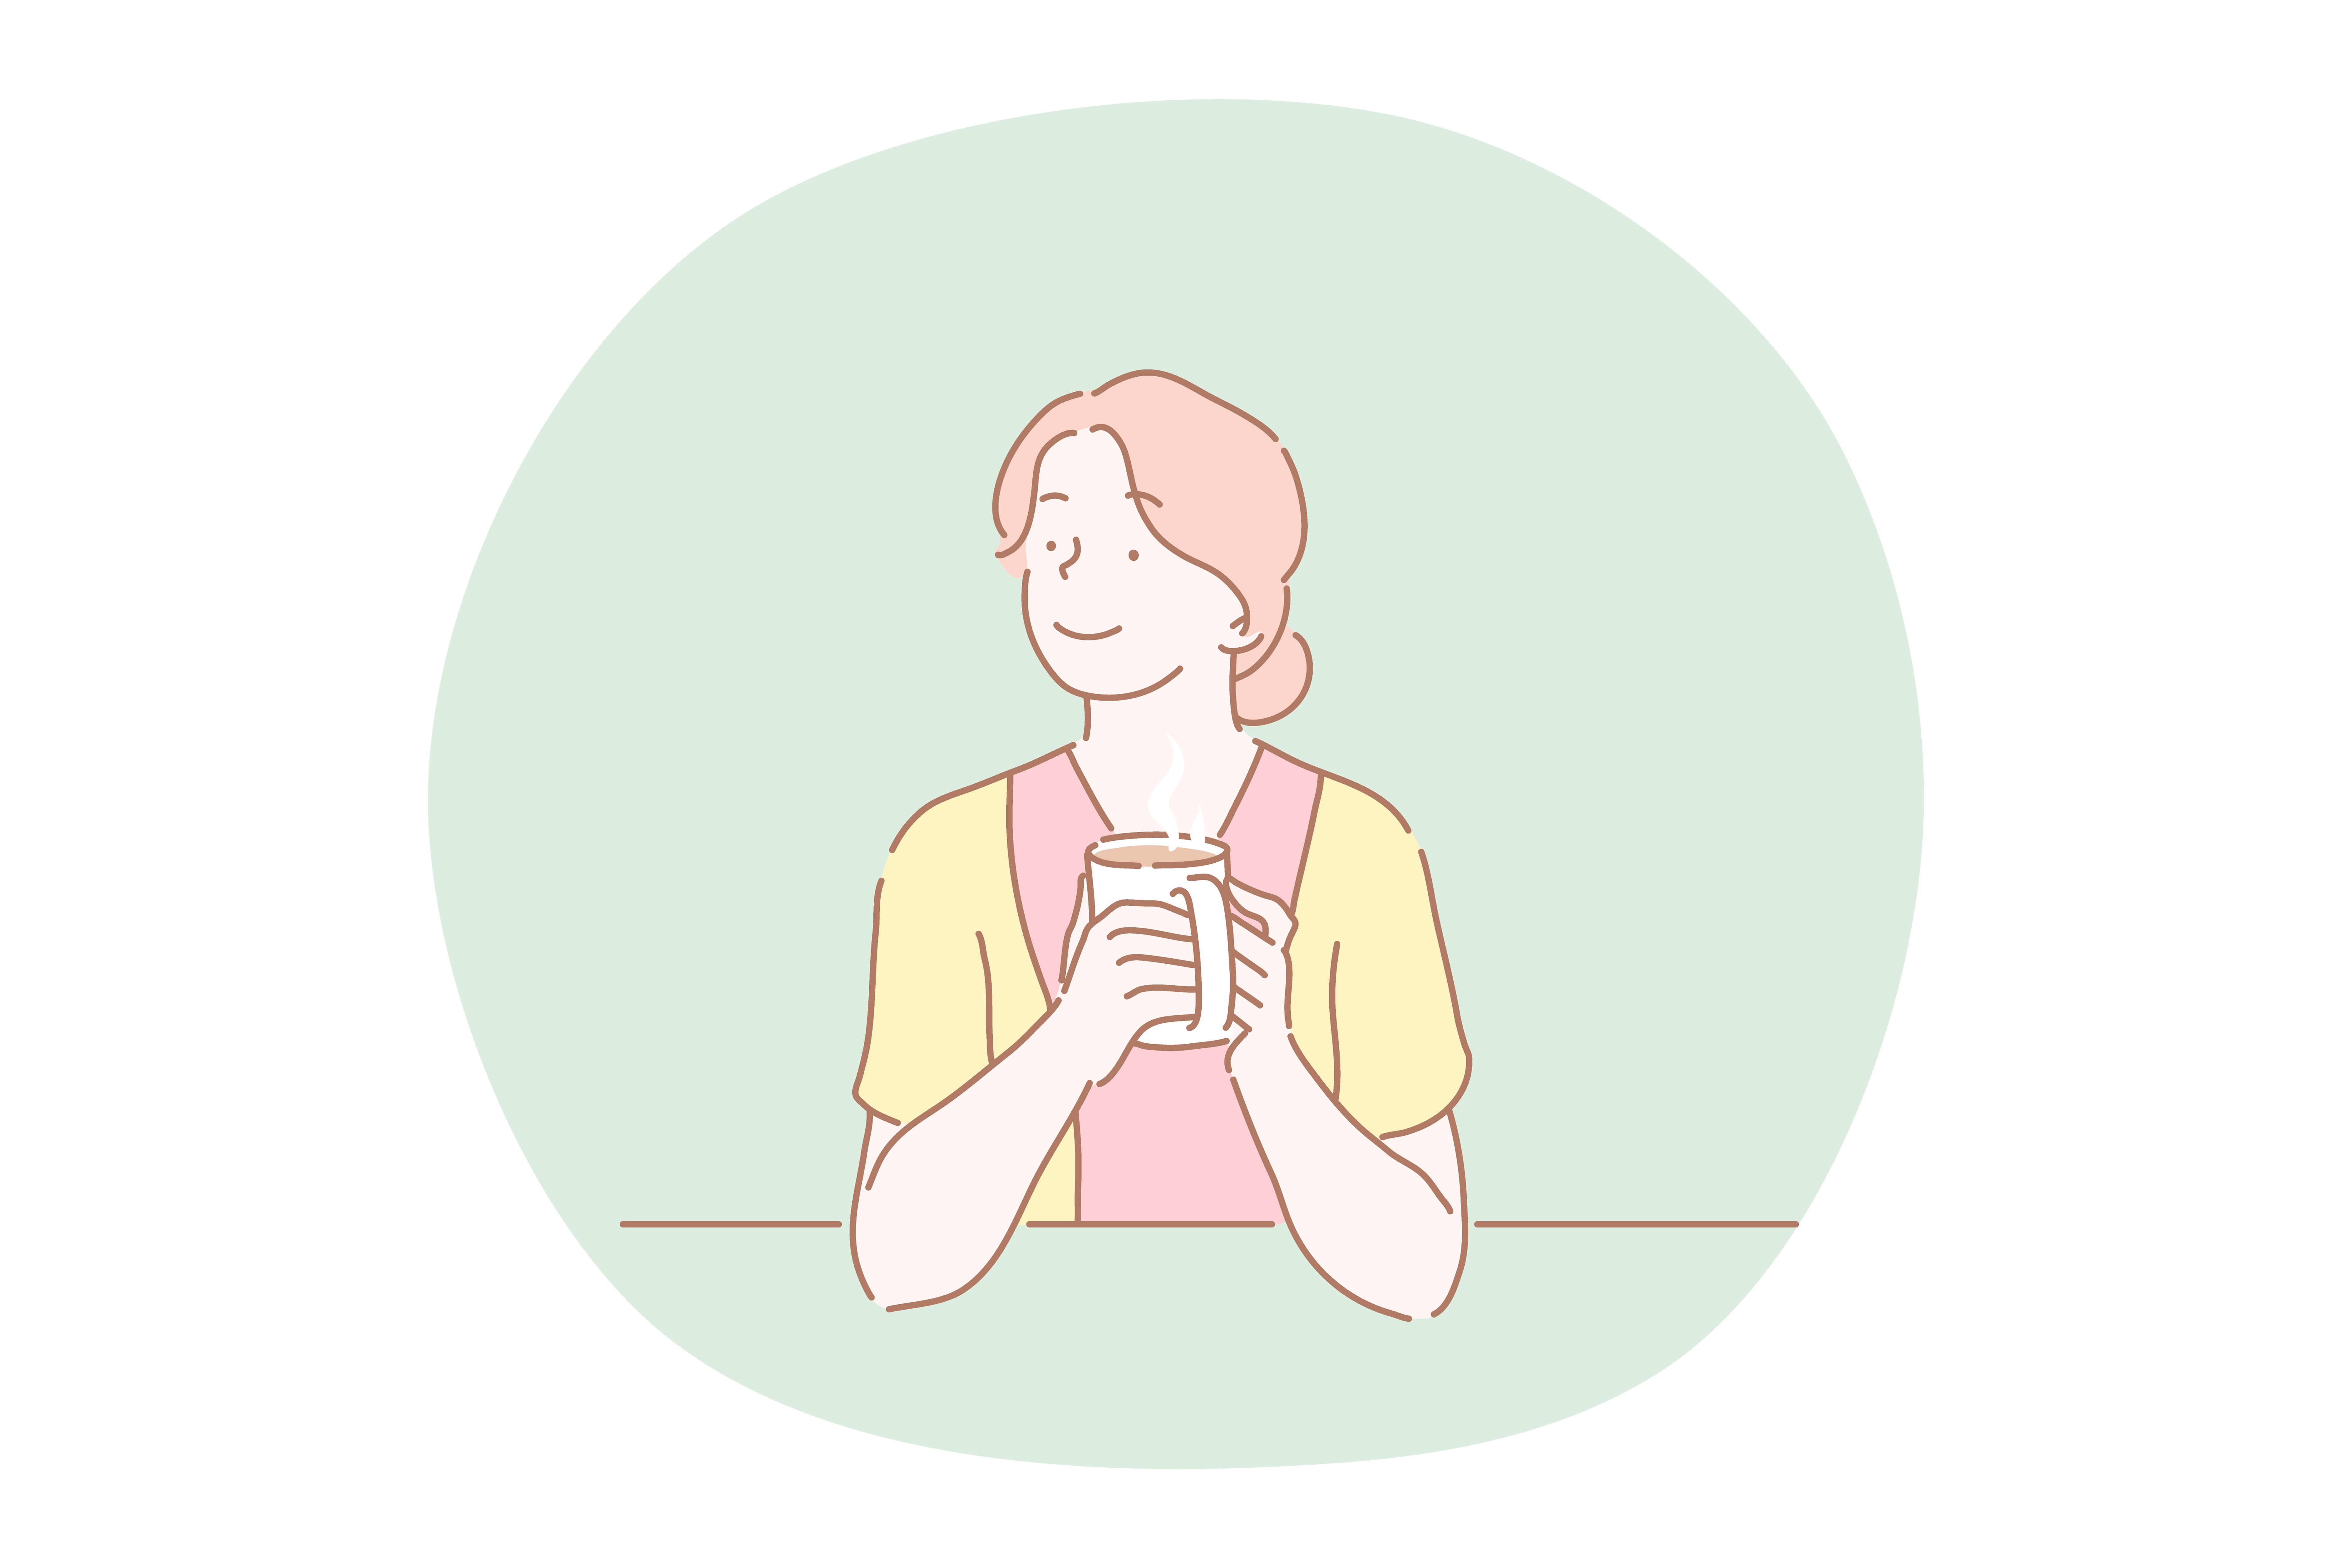 Hot drink, tea, coffee, warming up with drink concept. Young smiling woman cartoon character sitting at home or in cafe and holding mug with hot drink tea or coffee in hands vector illustration . Hot drink, tea, coffee, warming up with drink concept